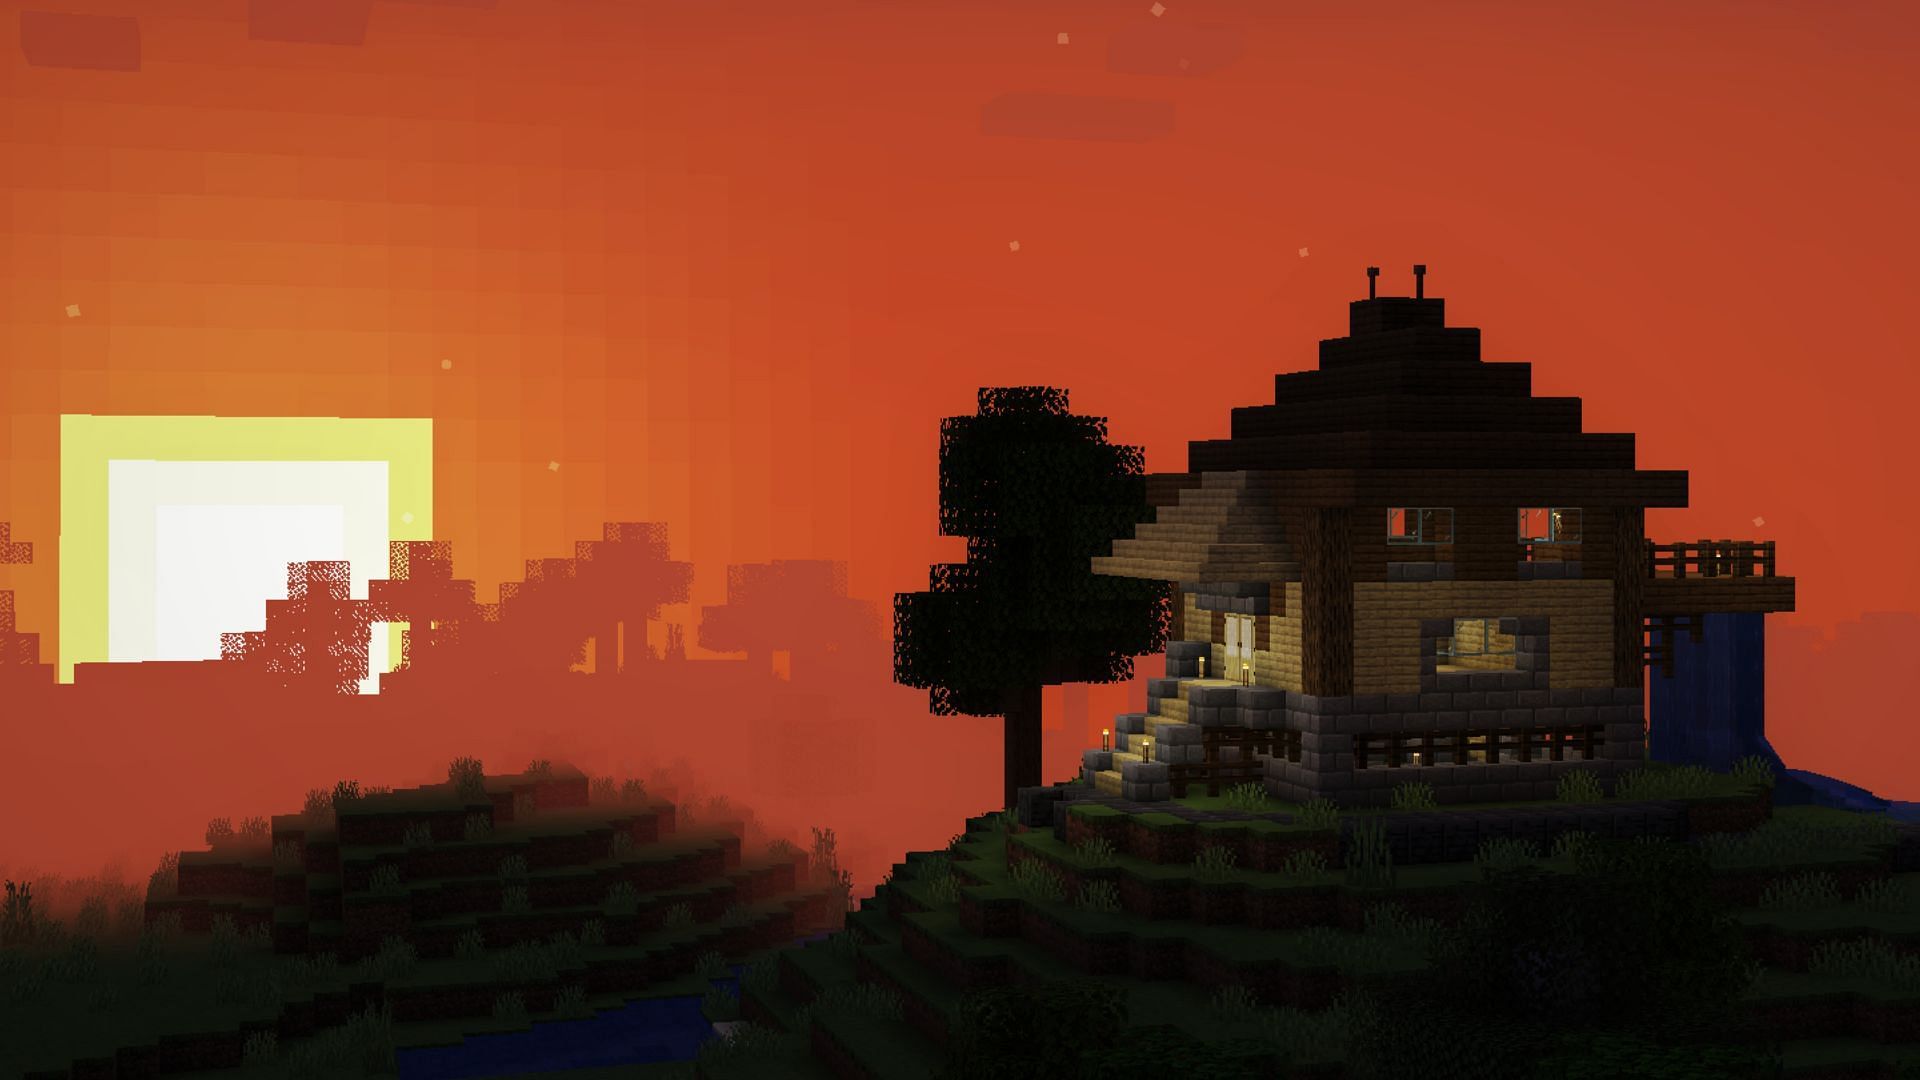 The simplest structure to build in Minecraft is a hut (Image via Mojang)